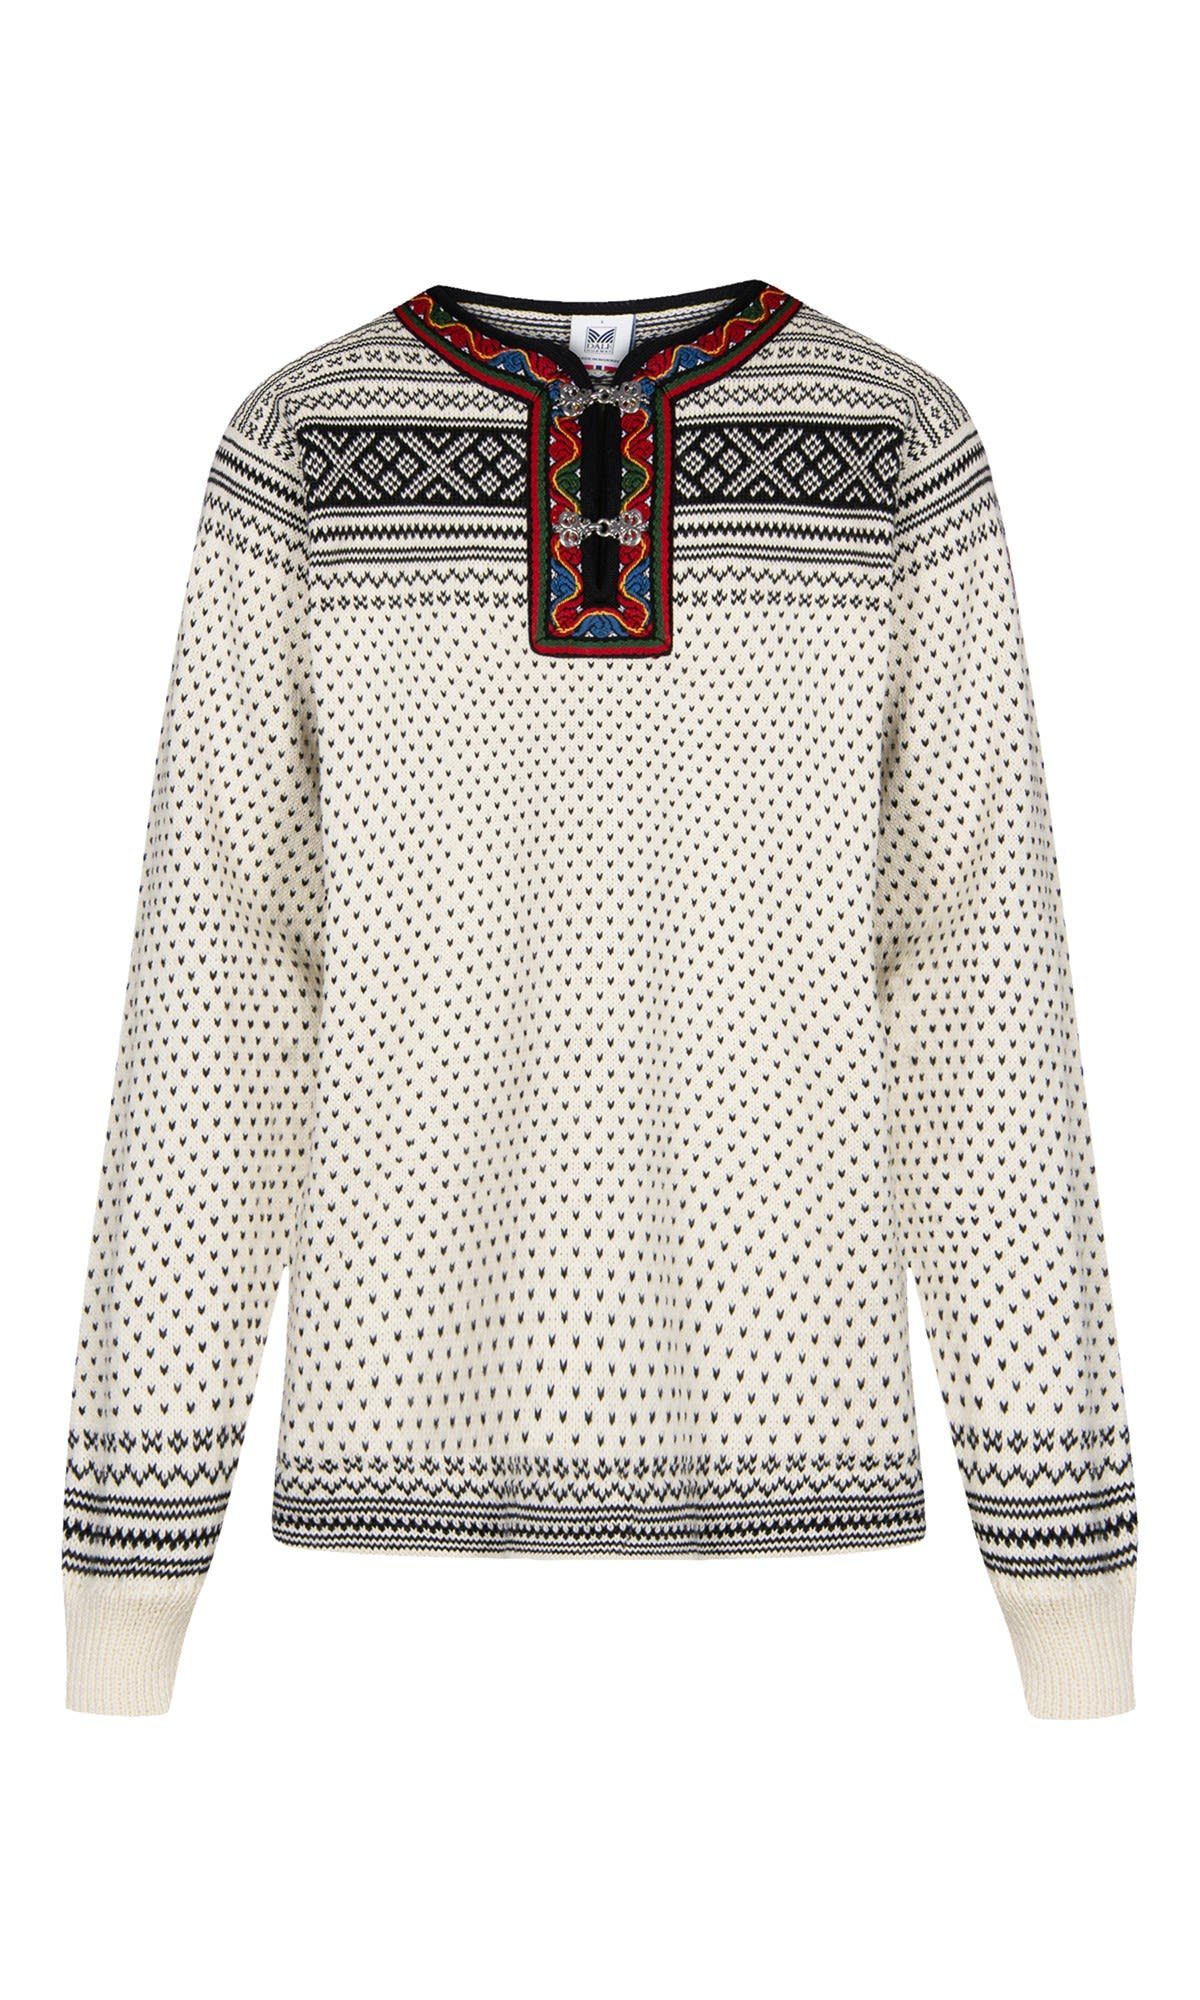 Dale of Norway Longpullover Dale Norway Black - Of Sweater Setesdal Freizeitpullover Offwhite